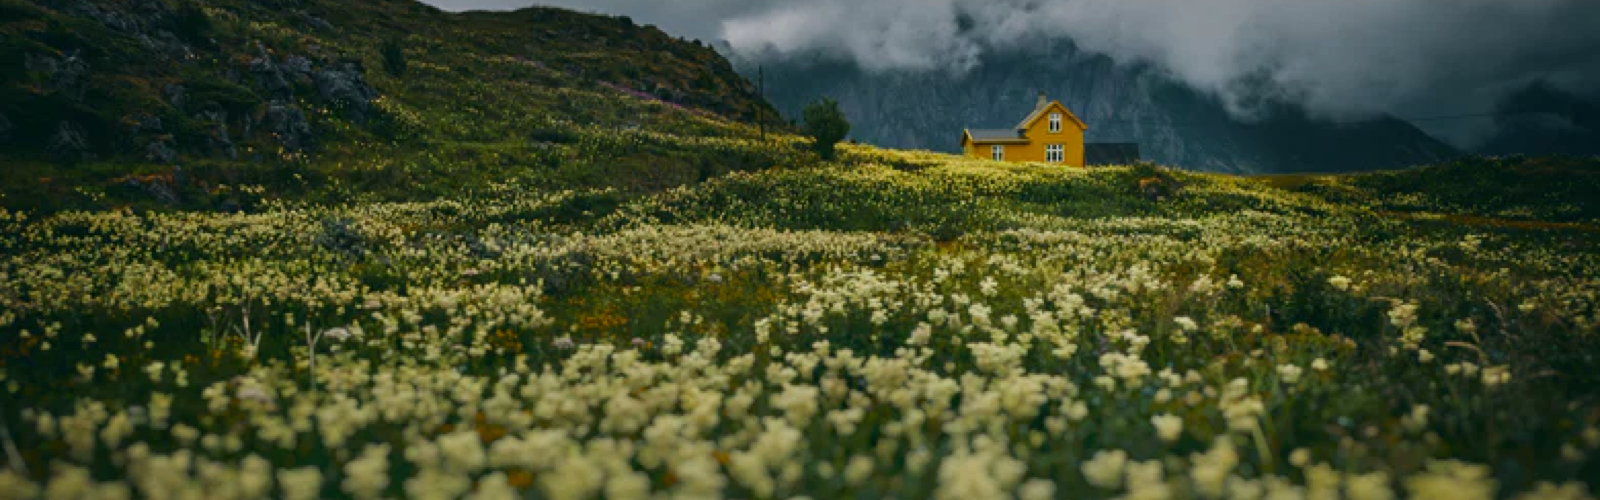 yellow house at the end of a grassy meadow, with mountains and mist in the background